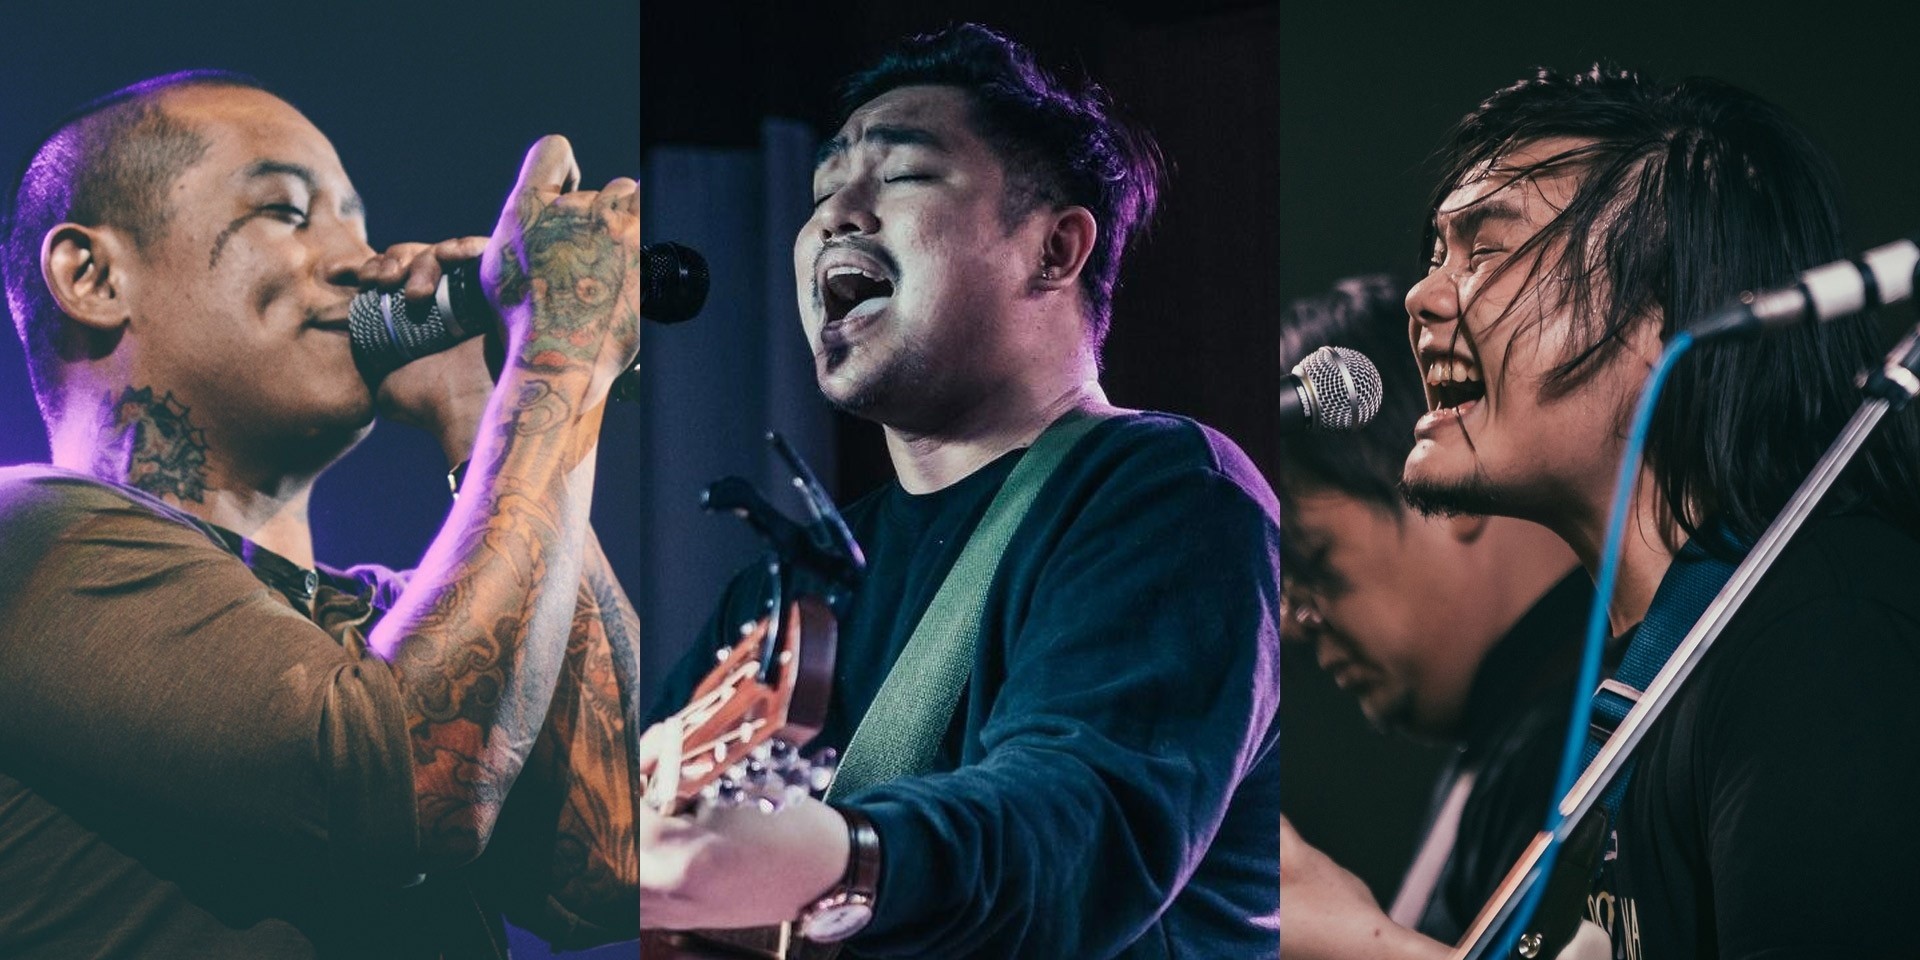 Urbandub, December Avenue, Autotelic, and more to perform at The Nick Automatic Show XL 2018